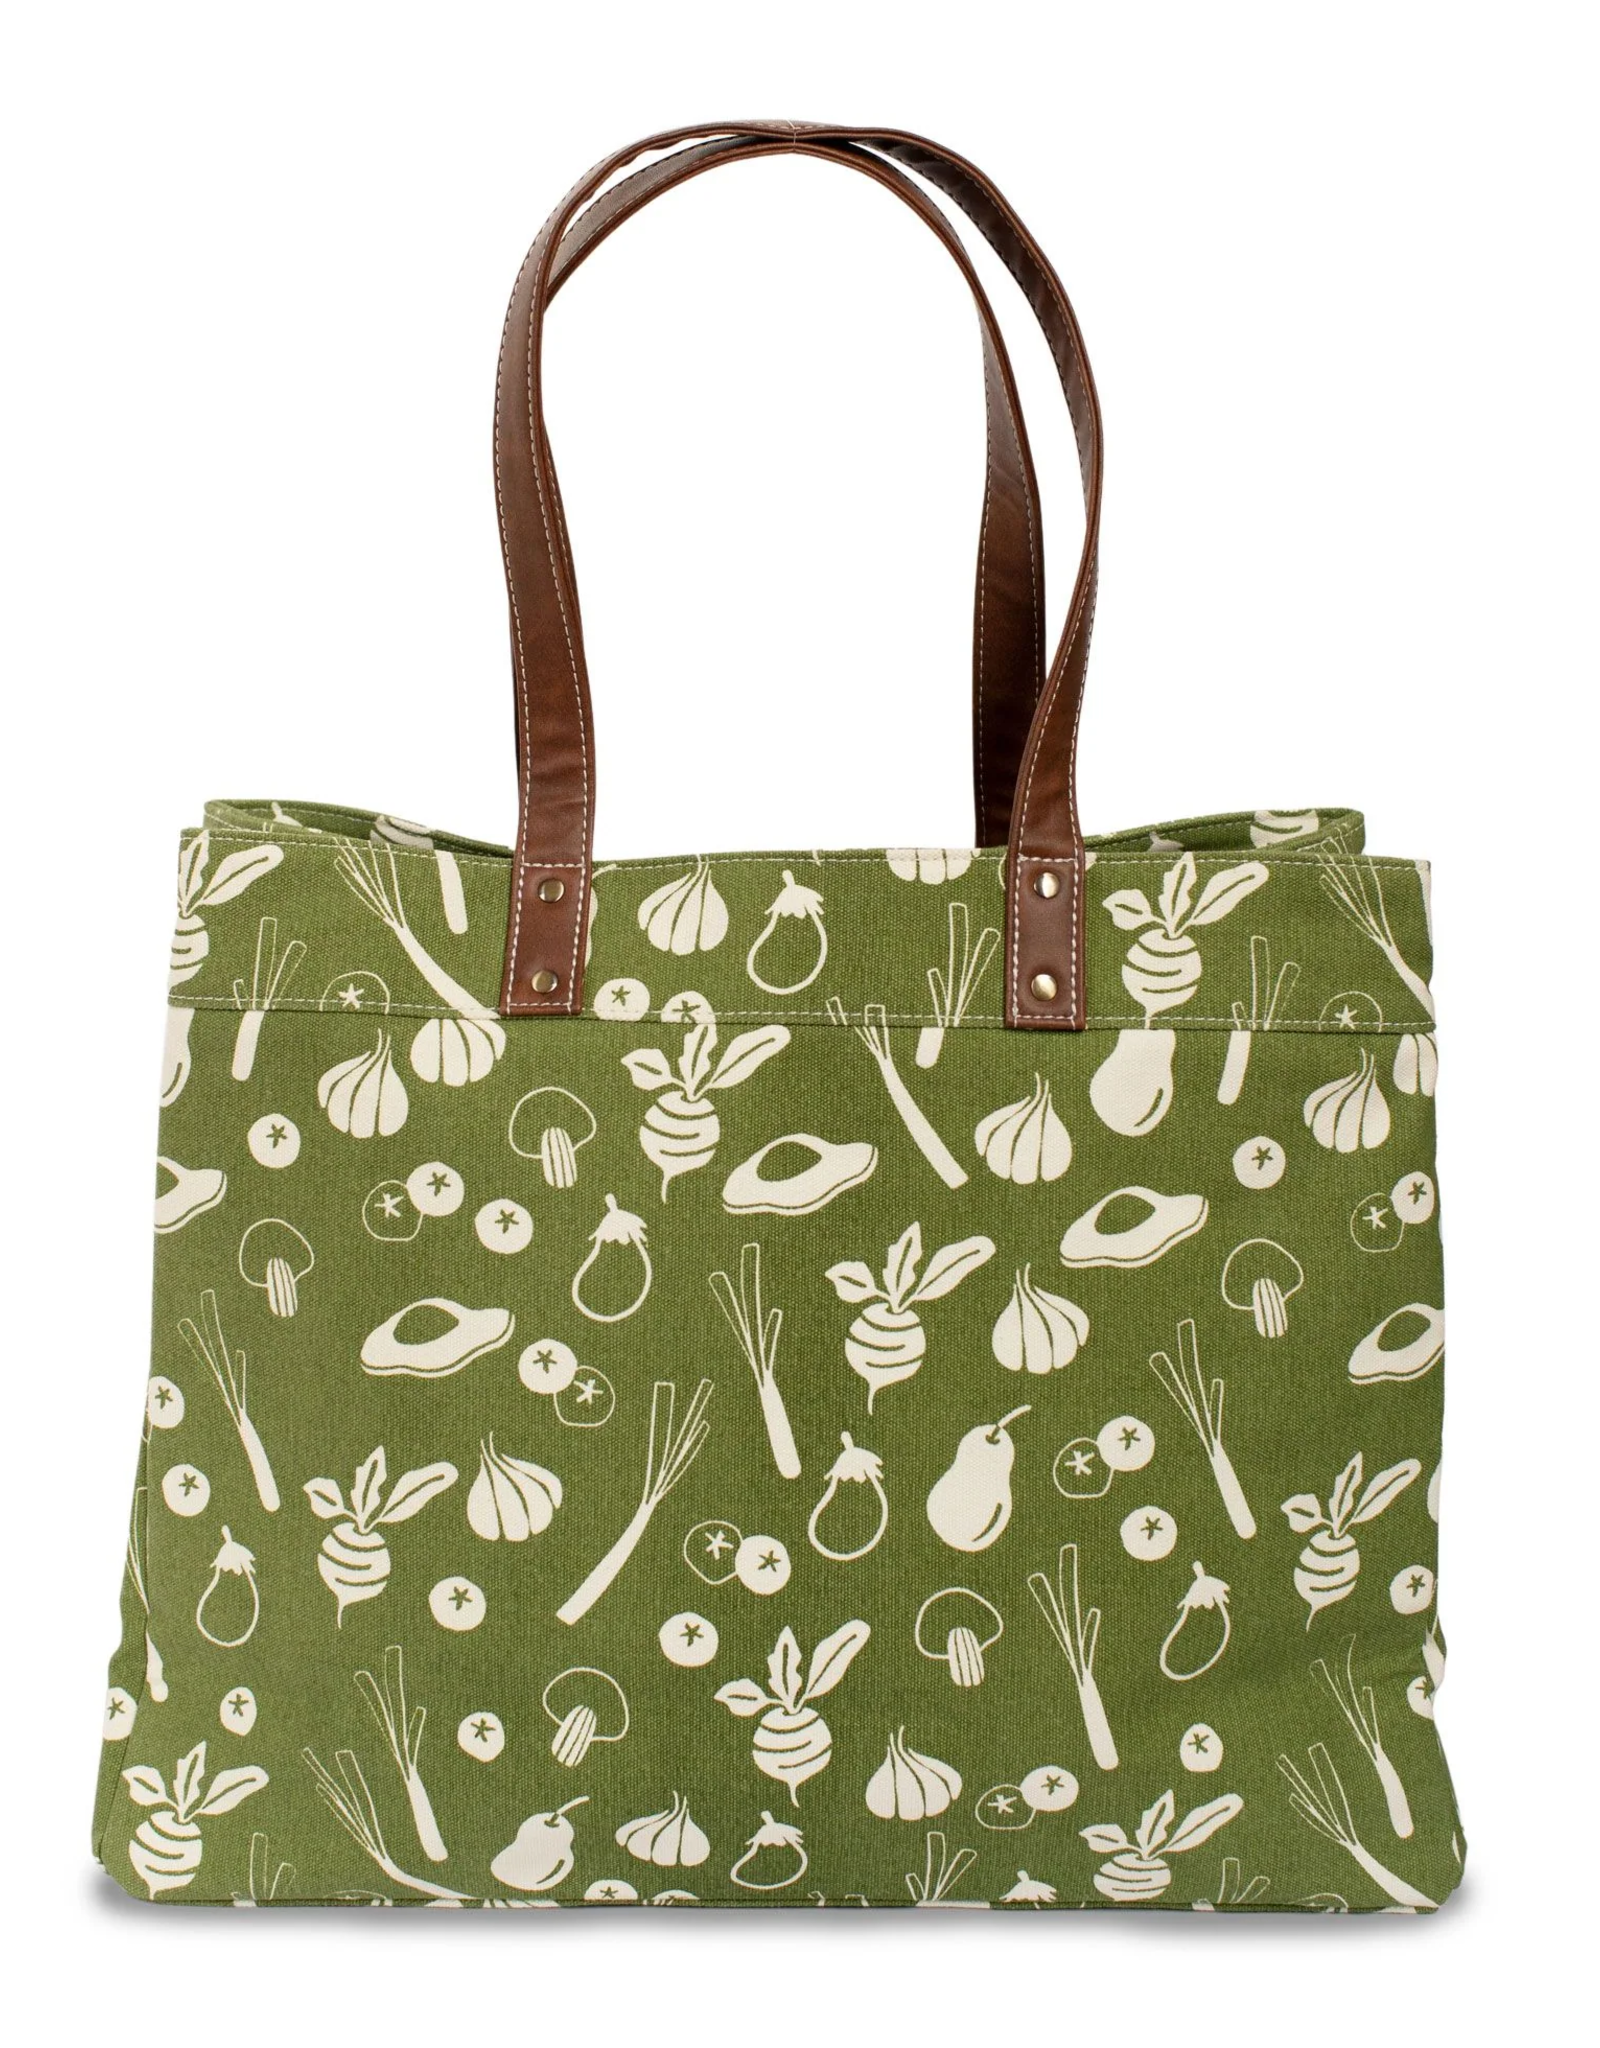 Maika Goods Carryall Tote Marche